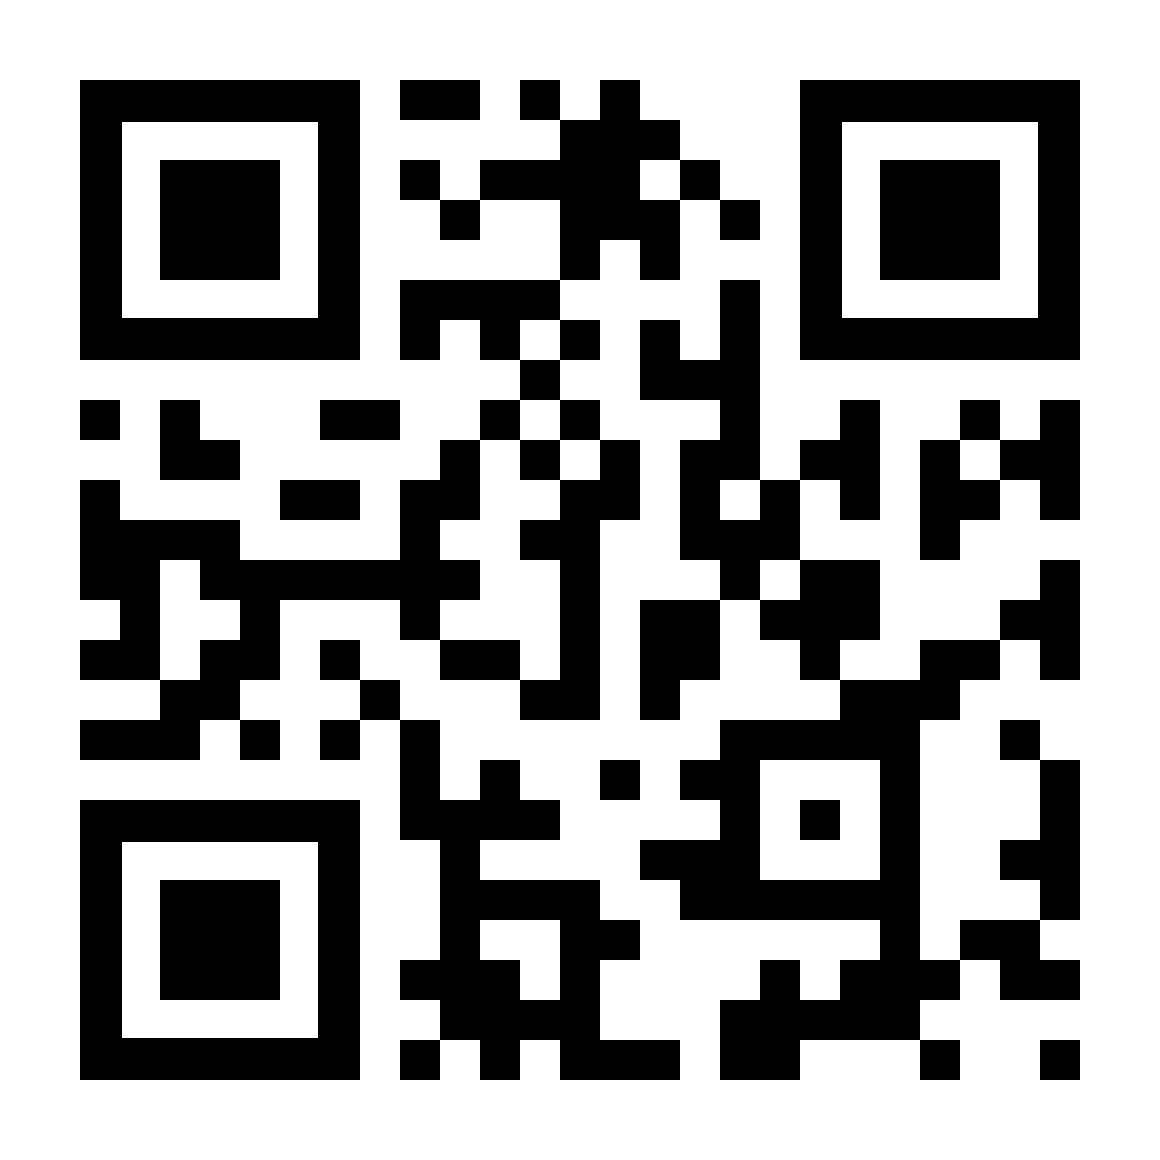 Use this QR code to book an online consultation with Dr. Odessa Wilson